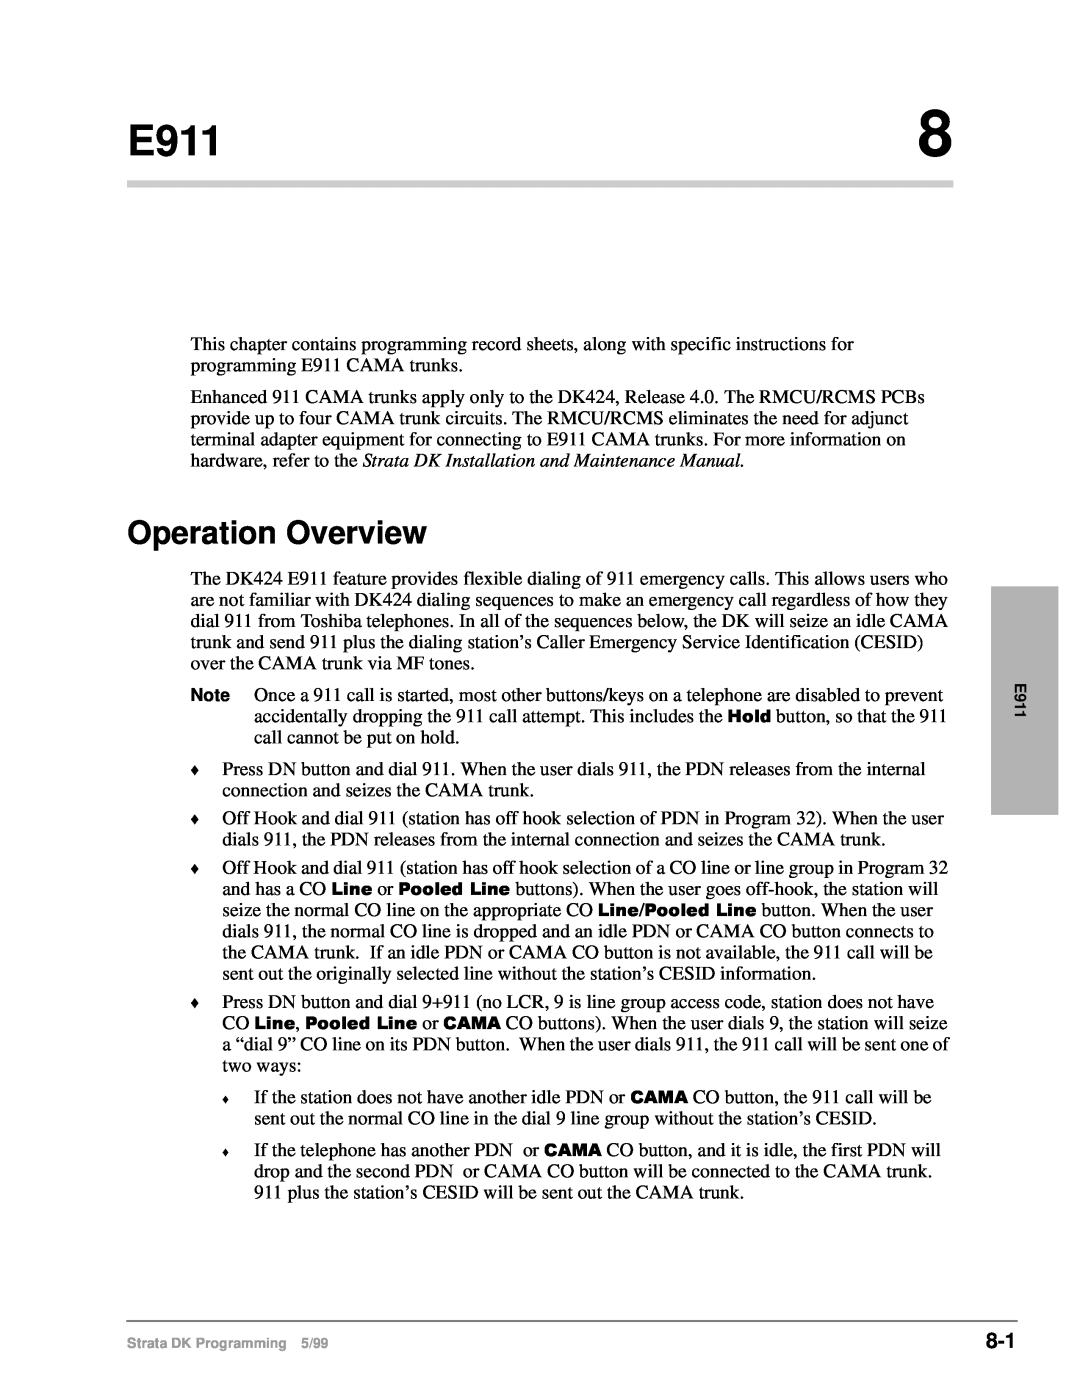 Toshiba dk14 manual E911, Operation Overview 